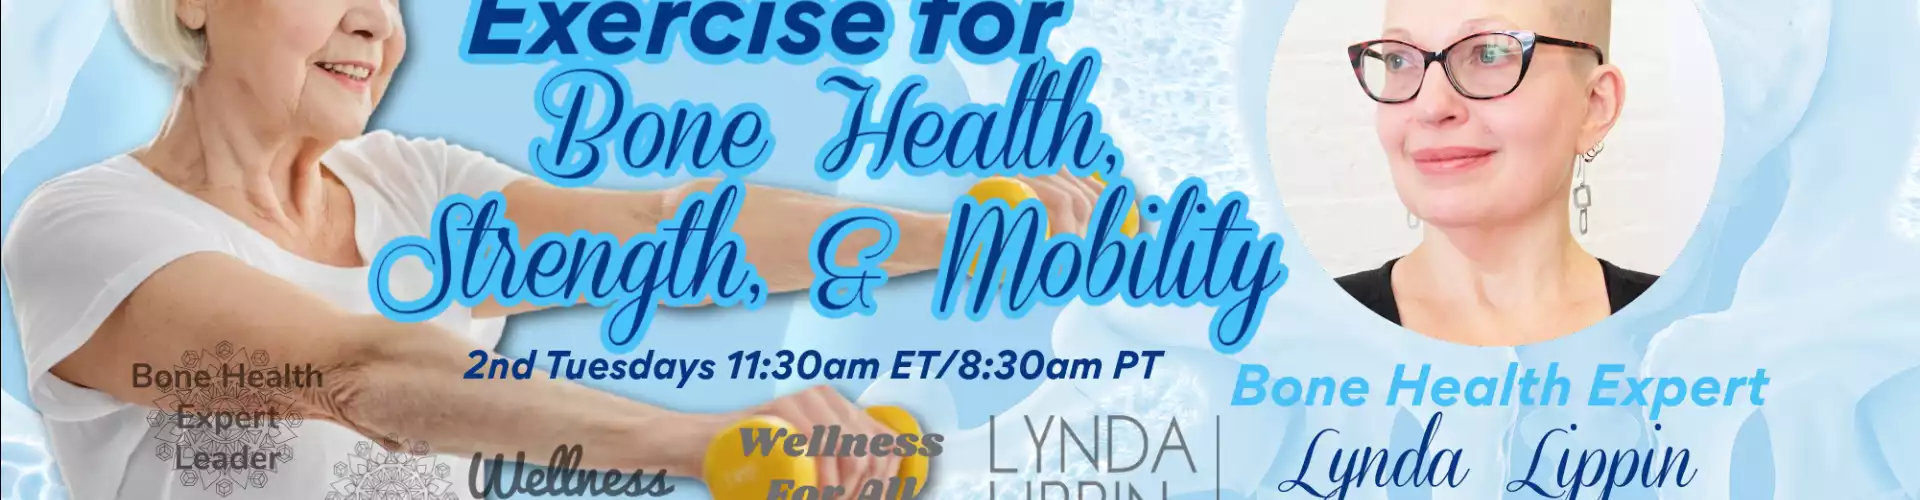 Exercise for Bone Health, Strength, & Mobility with WU Expert Lynda Lippin